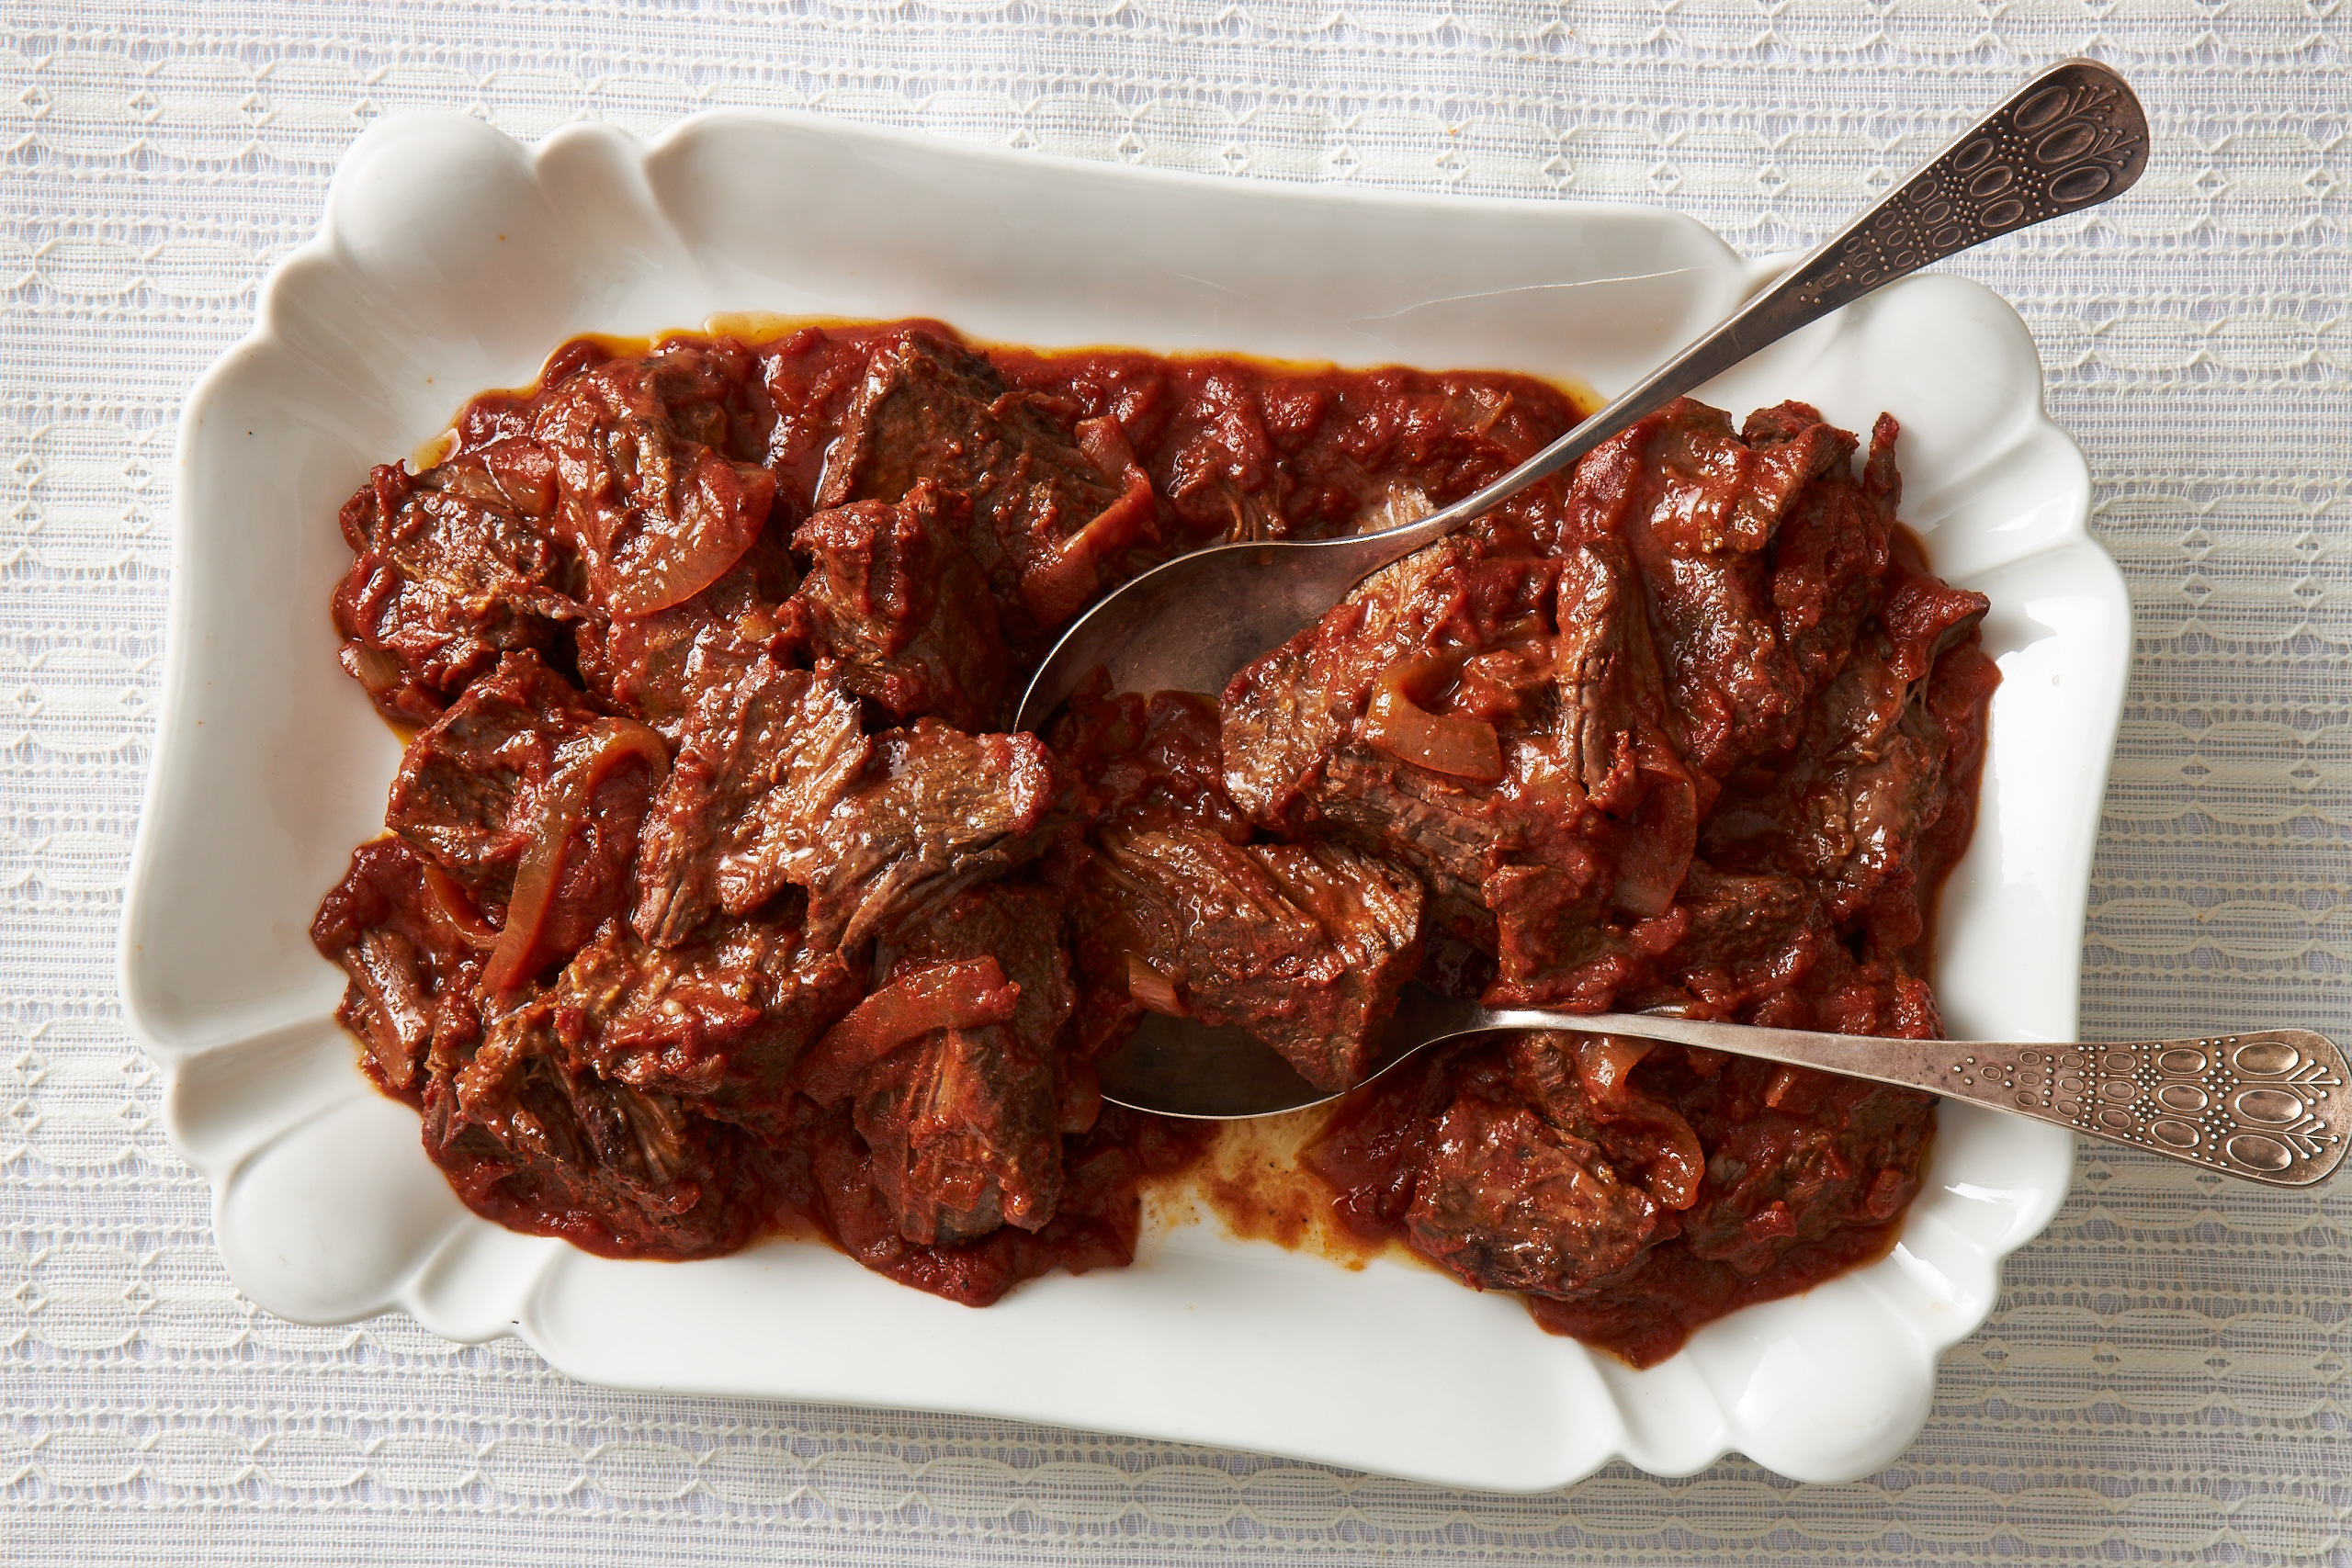 Chunks of beef in tomato sauce on white rectangular plate